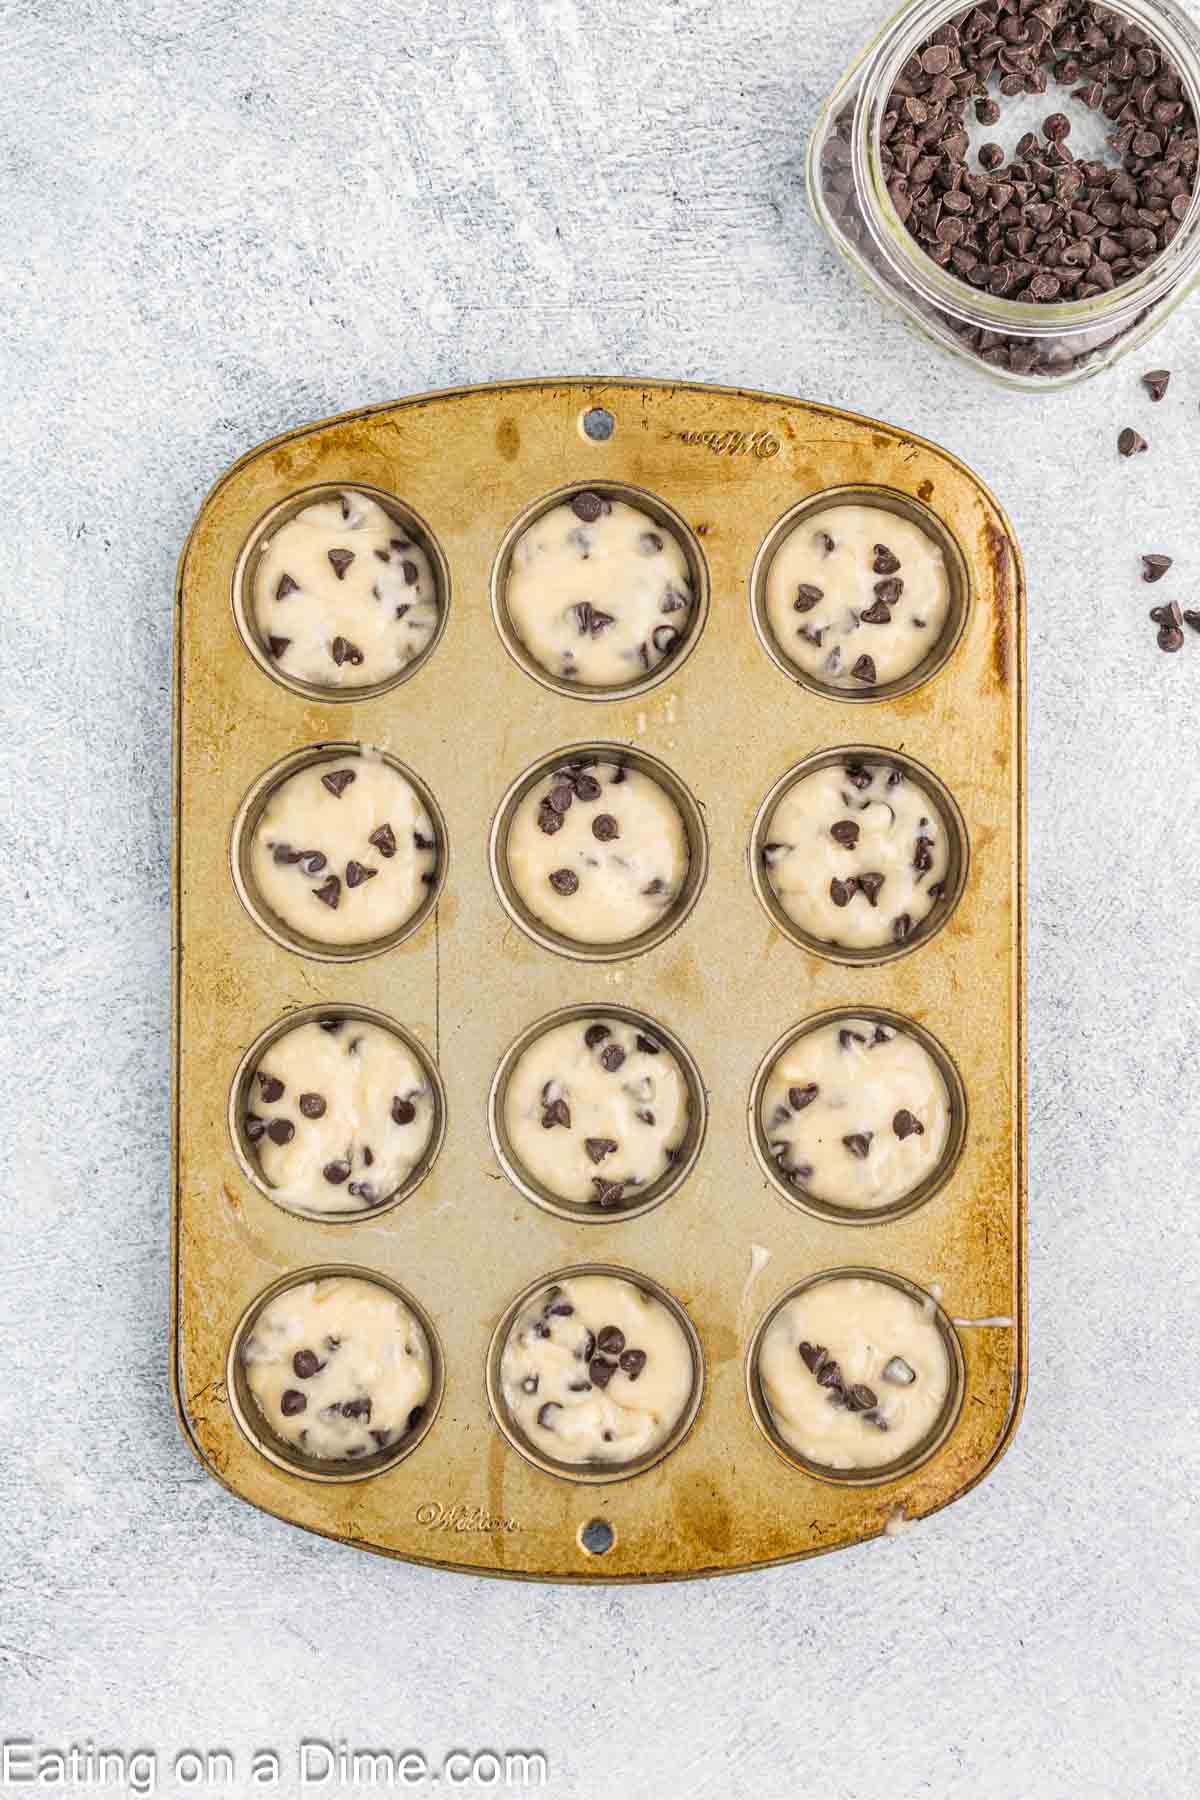 Placing the chocolate chip muffin batter in the muffin pan